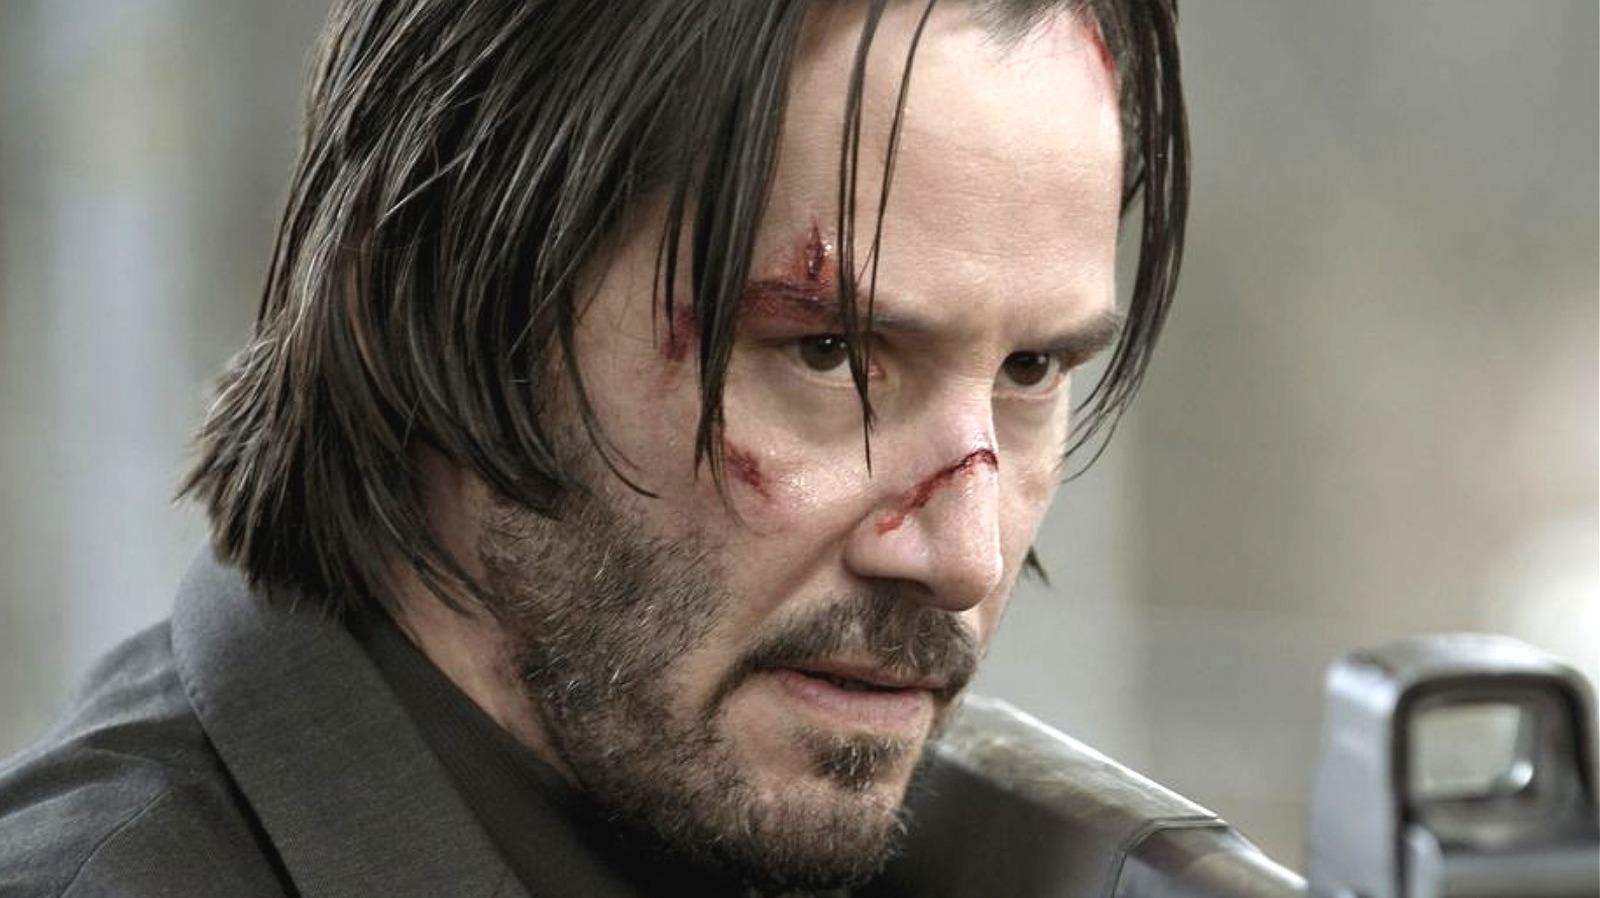 Why Netflix Is Obsessed With Ripping Off John Wick